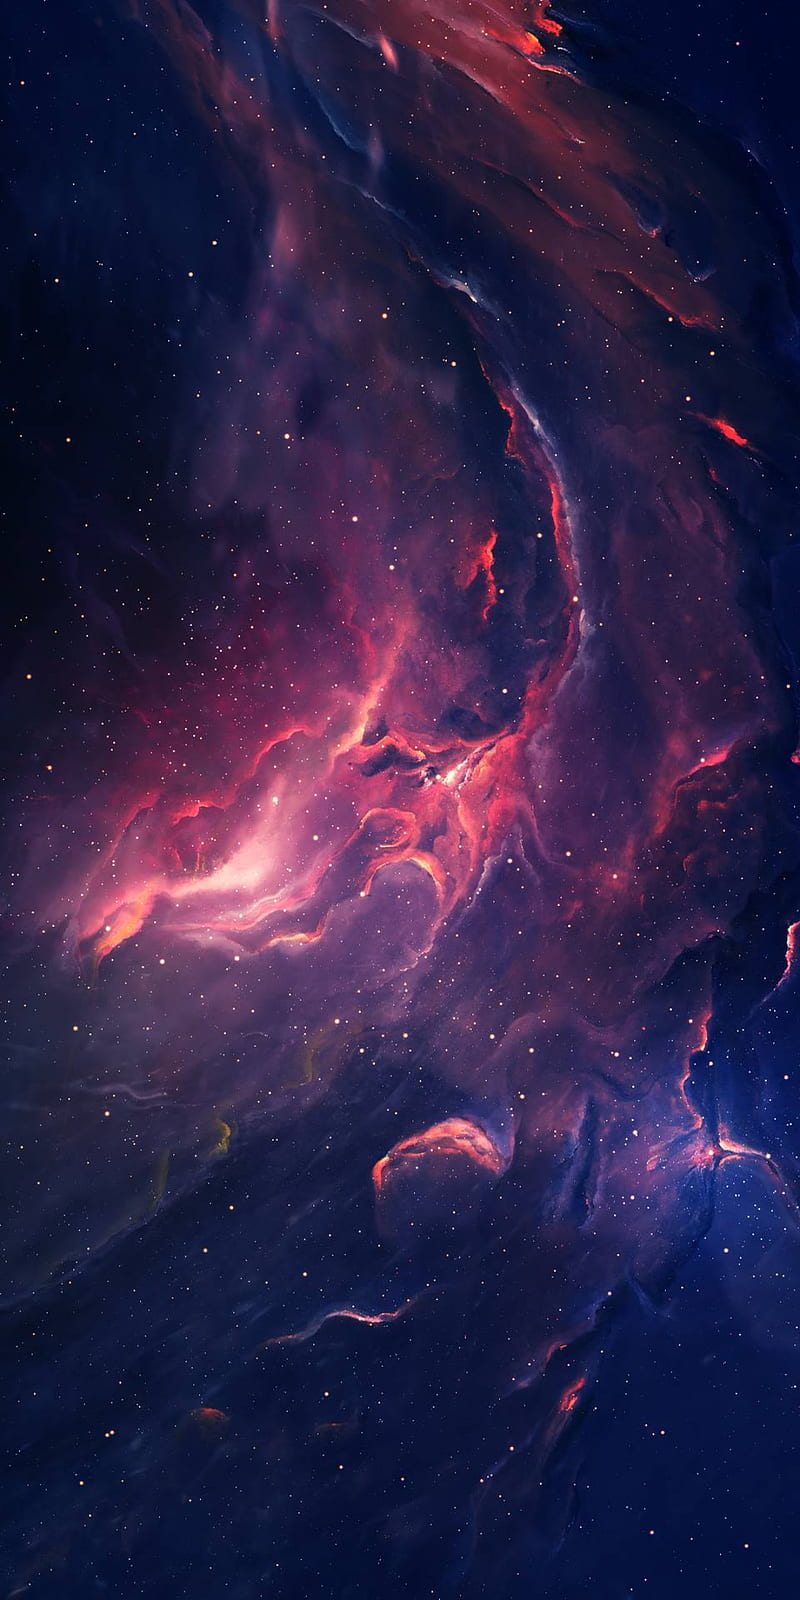 Abstract Space wallpaper by Arthur Lambillotte on Dribbble